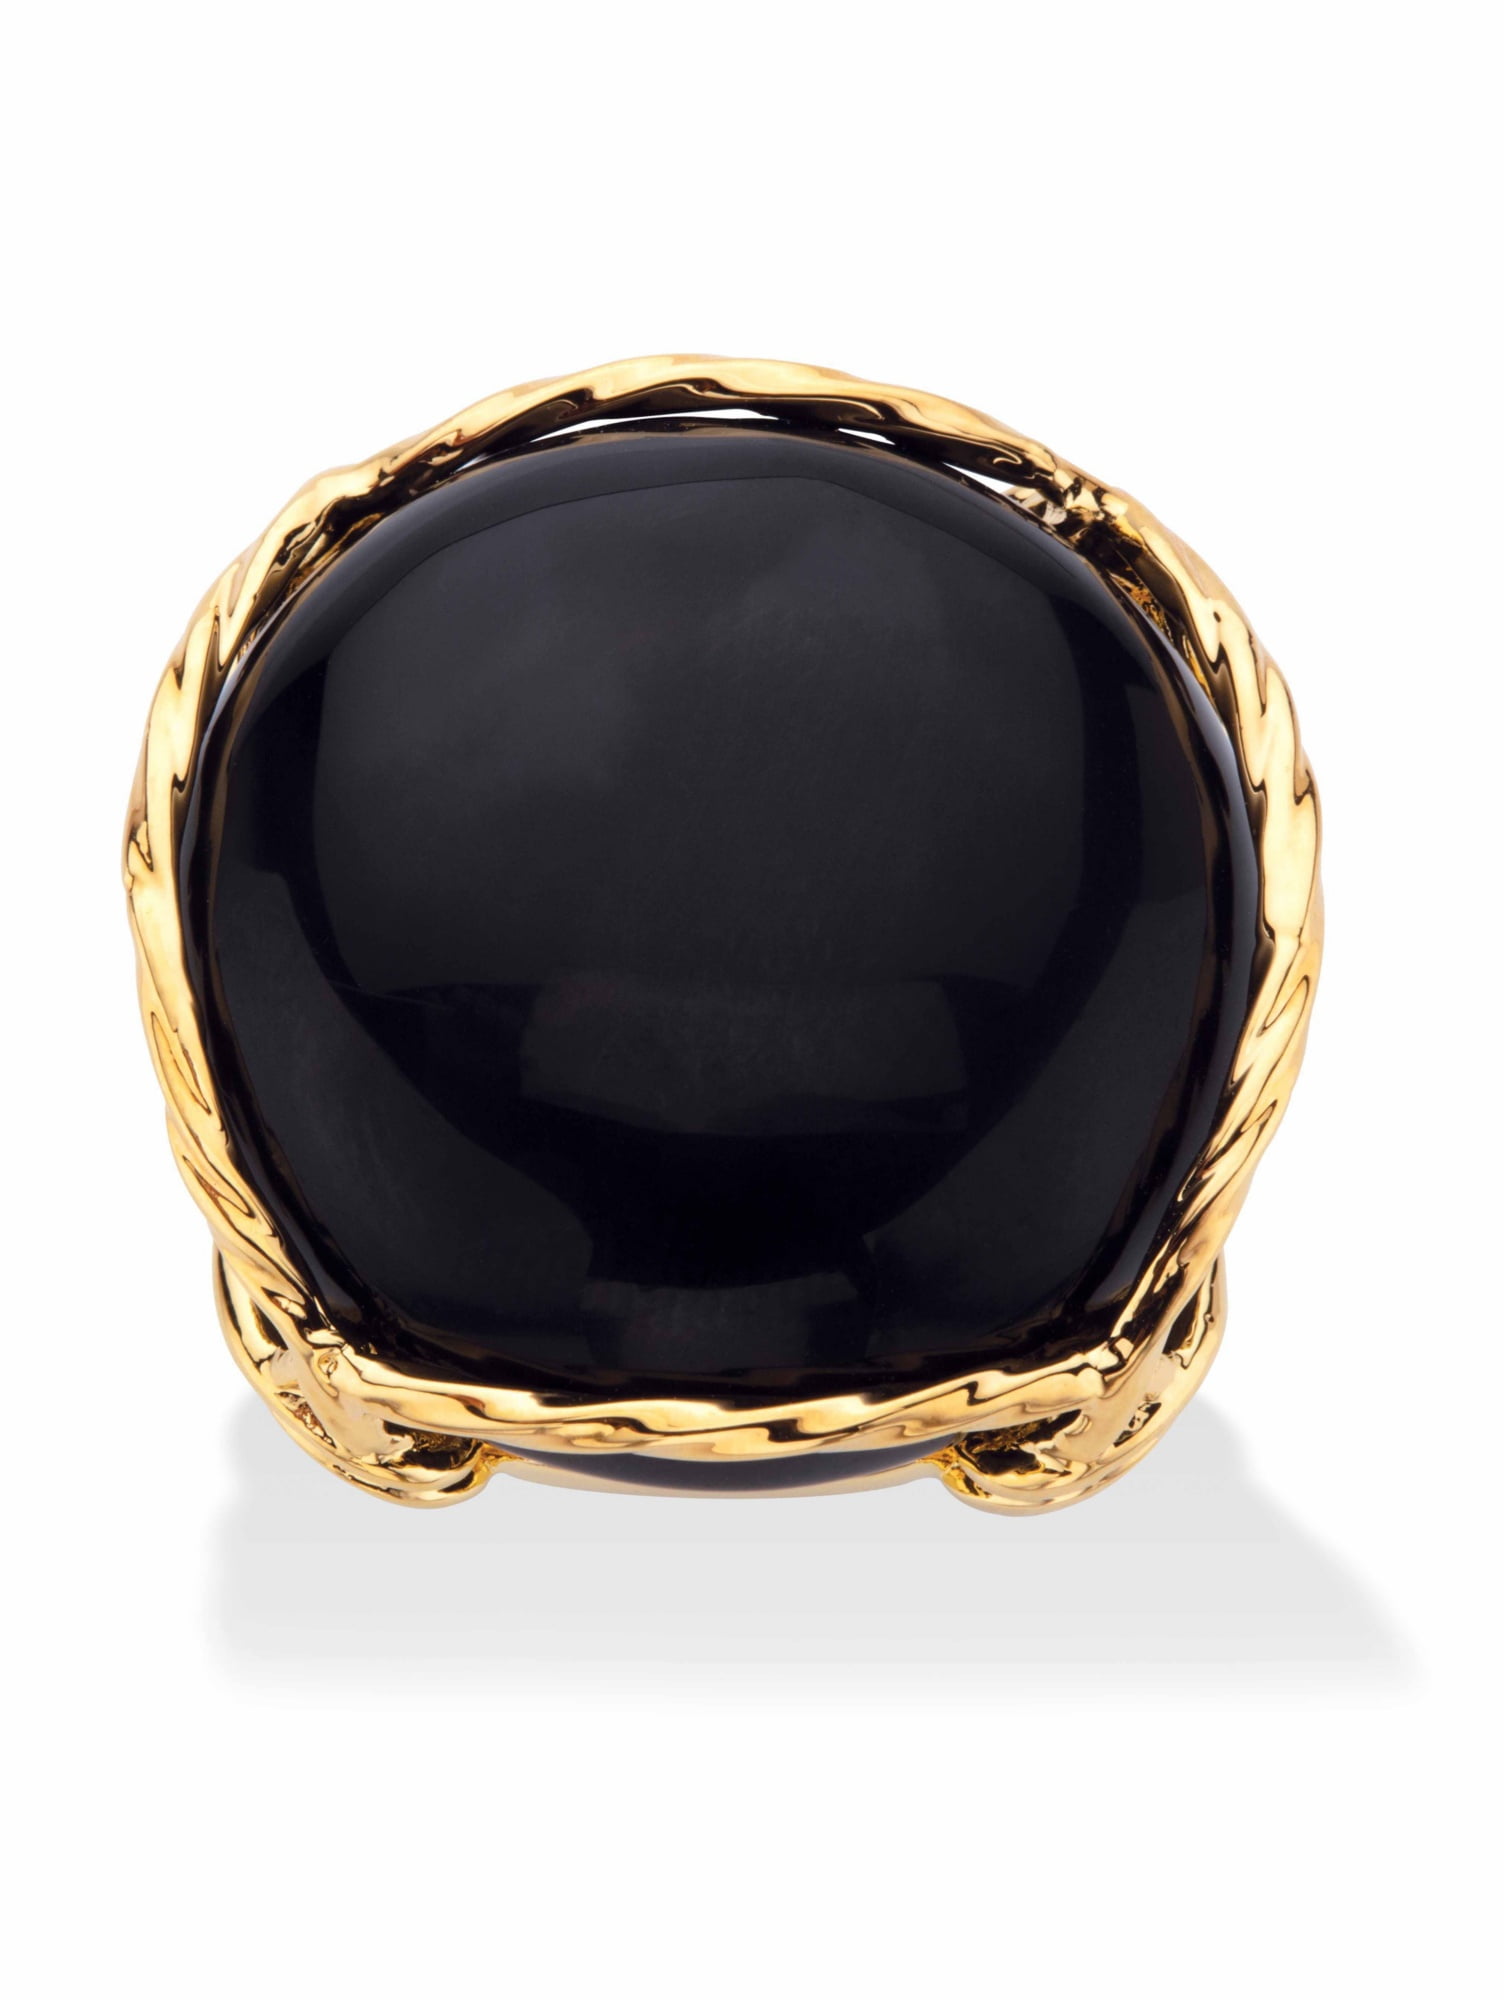 Bold Round Black Onyx Gemstone Crown Band Ring Real Solid 14K Yellow Gold 